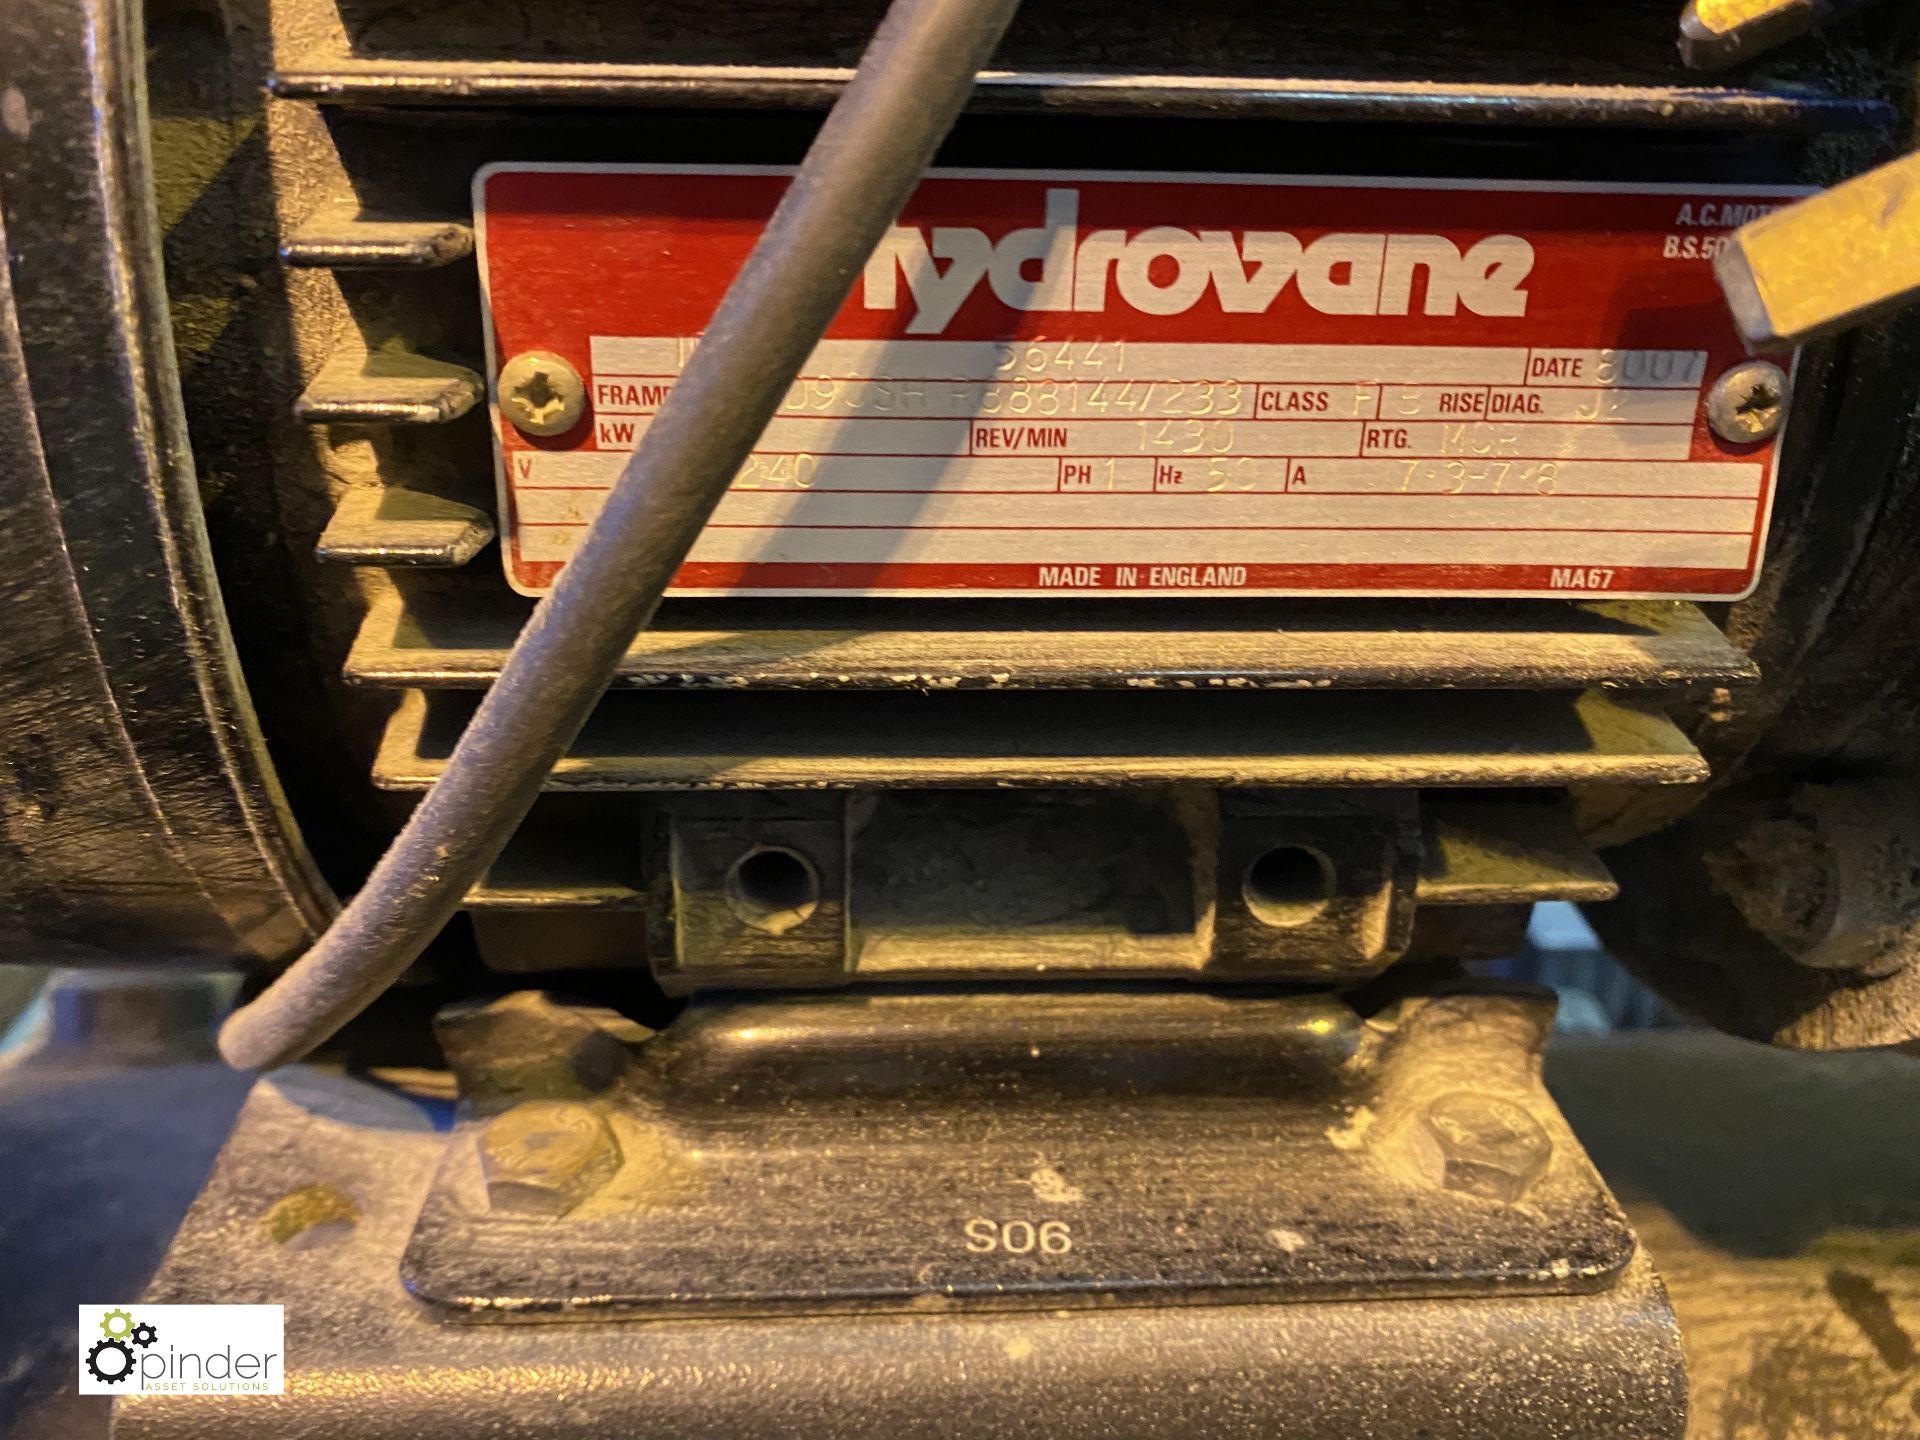 Hydrovane 5 receiver mounted Screw Compressor, 240volts - Image 4 of 5